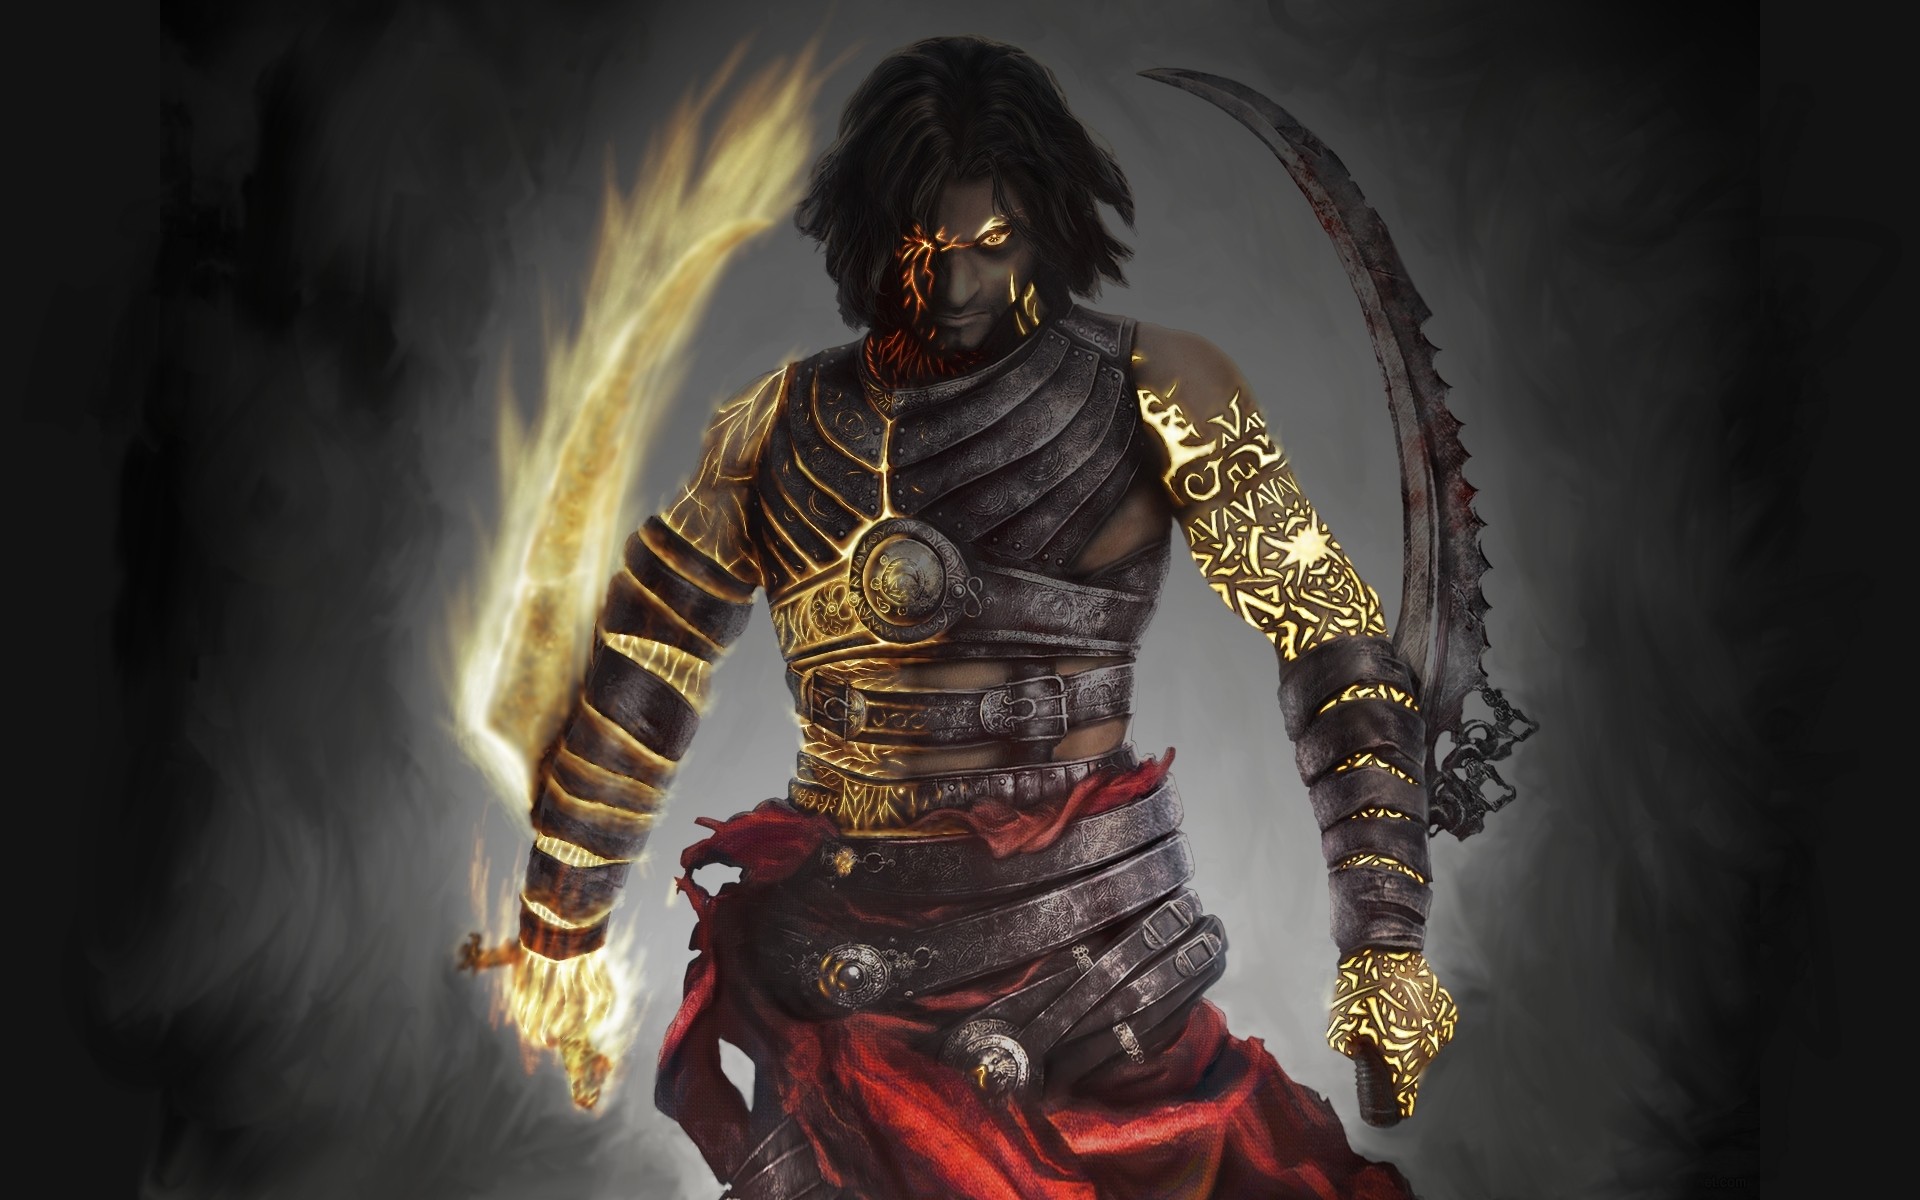 General 1920x1200 Prince of Persia: Warrior Within Prince of Persia: The Two Thrones video games fantasy art video game art Ubisoft video game men fantasy men